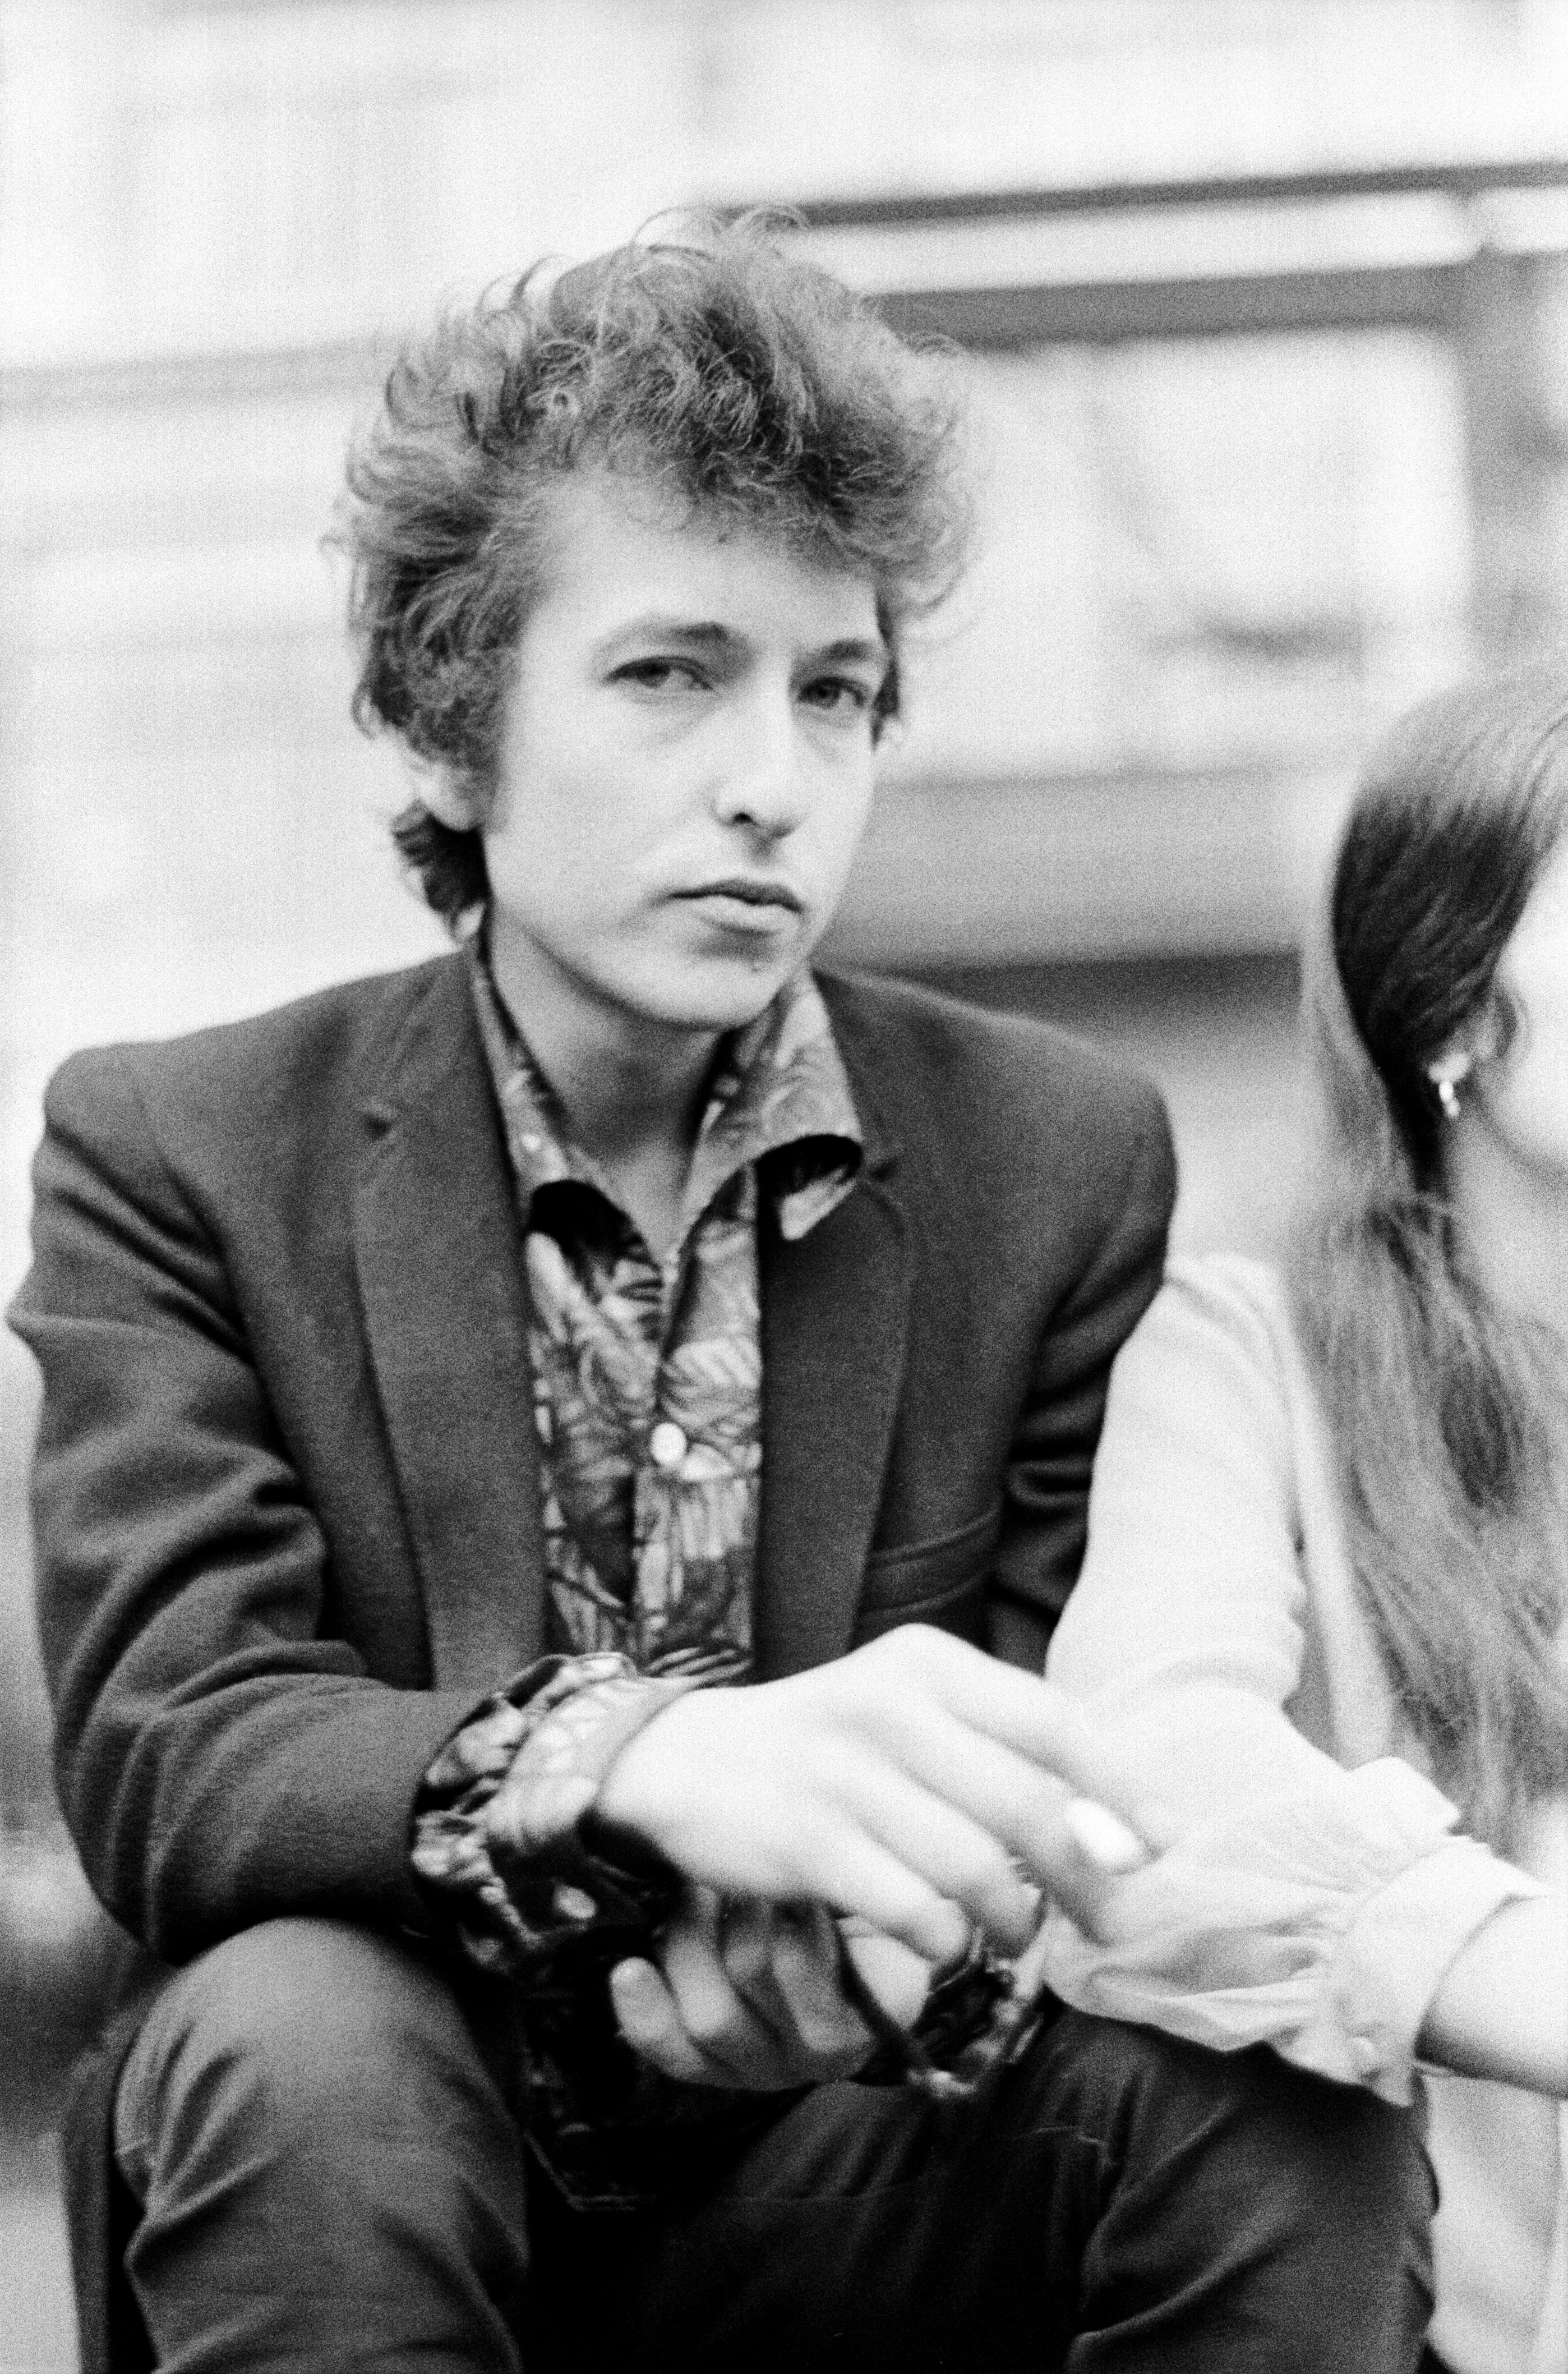 Bob Dylan poses at a press call on April, 1965, in the Embankment Gardens, London. | Source: Getty Images